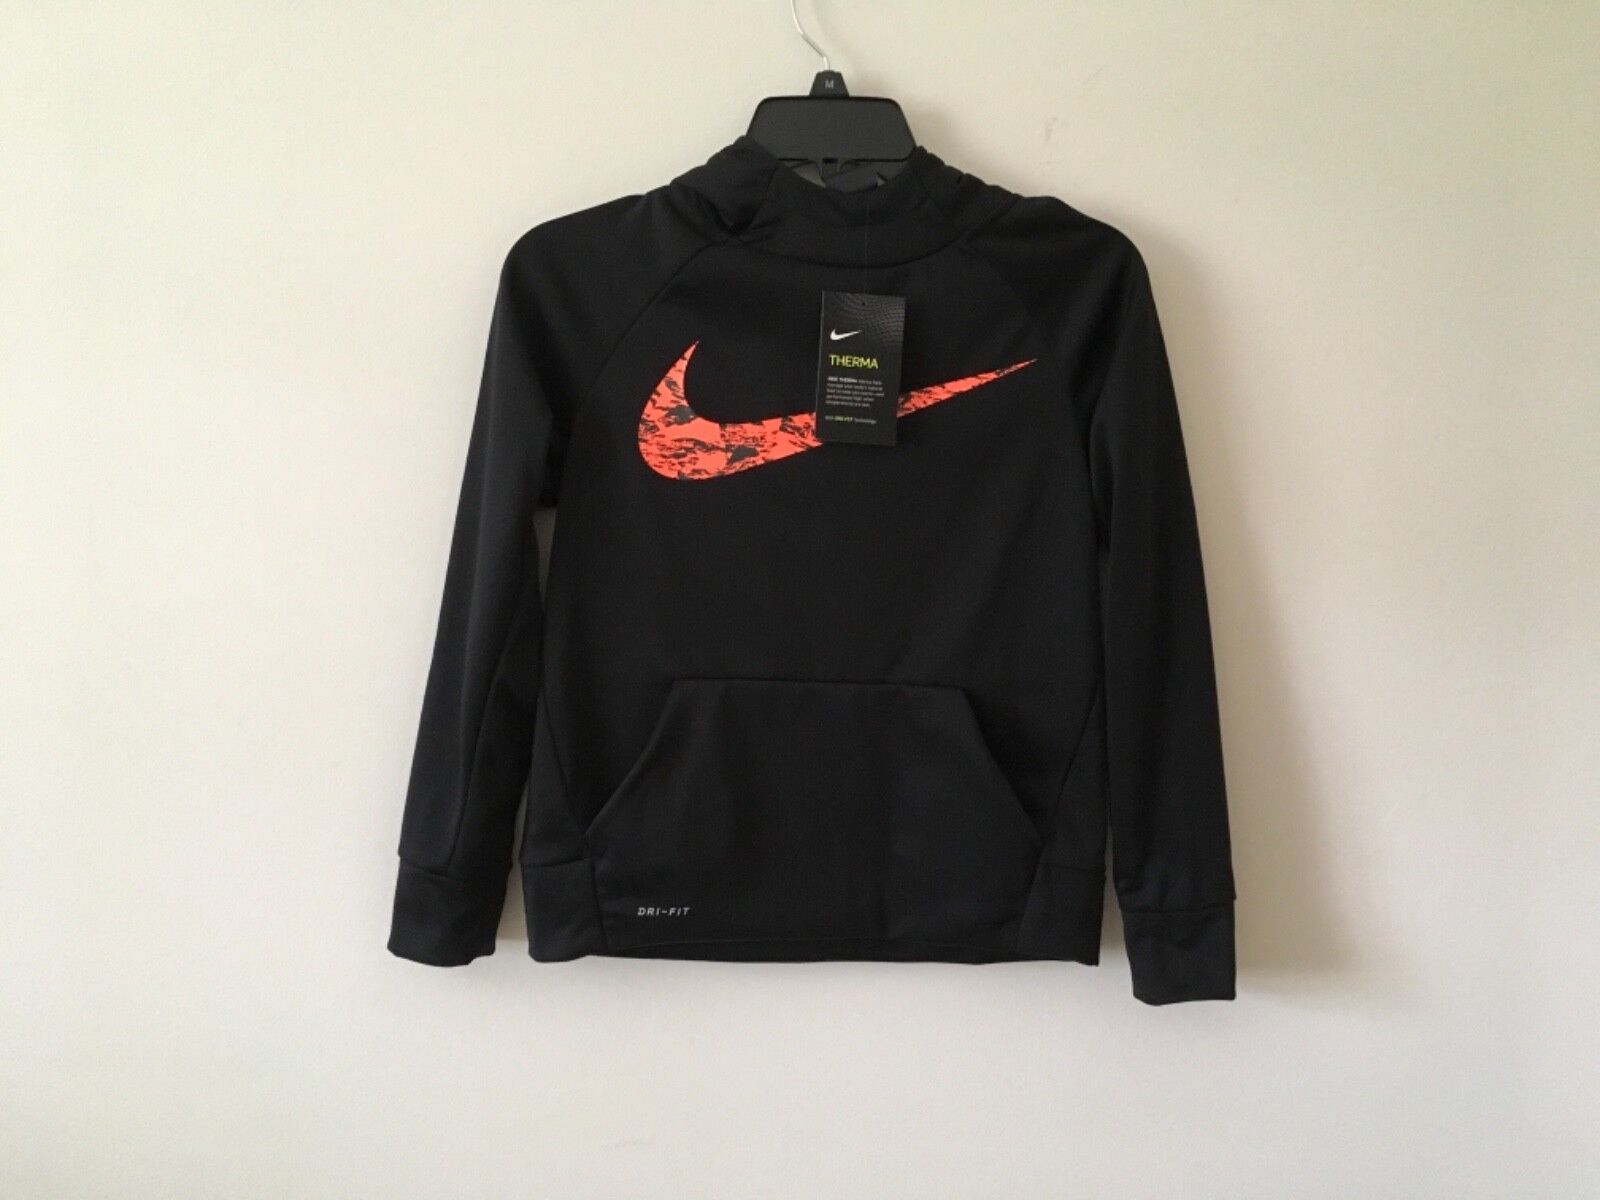 Nwt Nike Dri-fit Therm Boy’s Sz: S, Pullover Hooded Sweater, $40